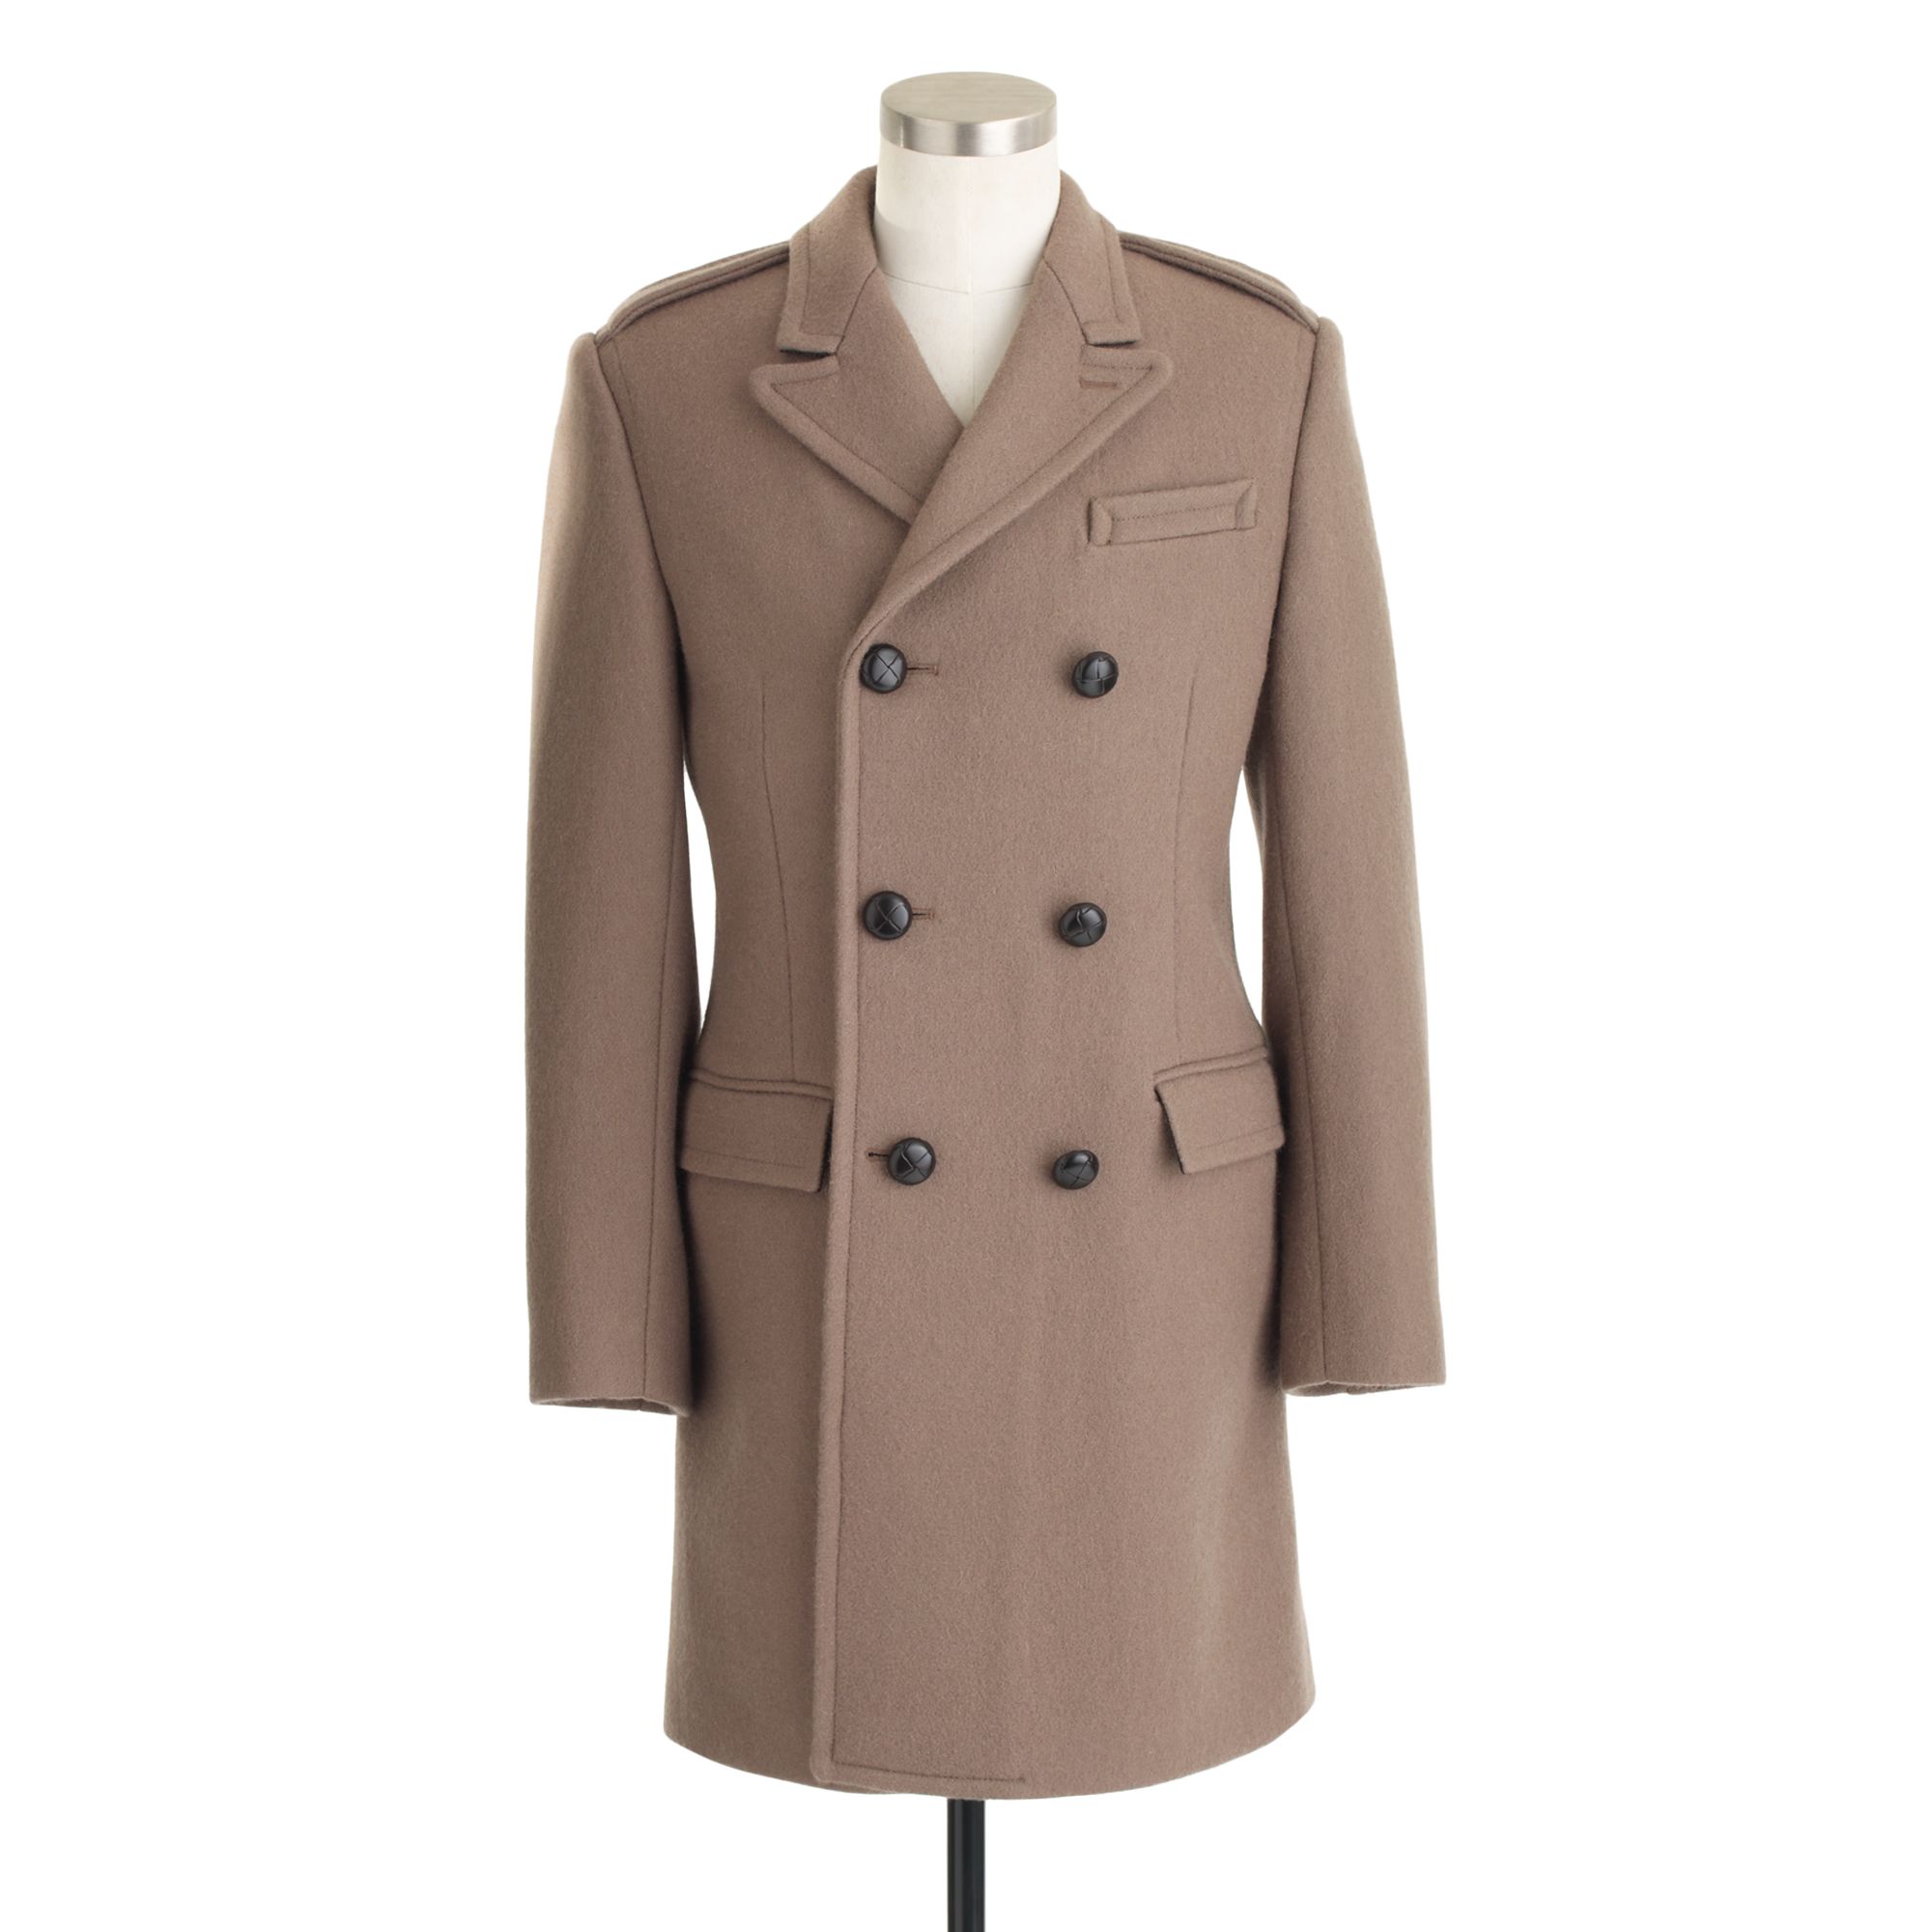 Lyst - J.Crew Ludlow Double breasted Topcoat in English Wool in Natural ...